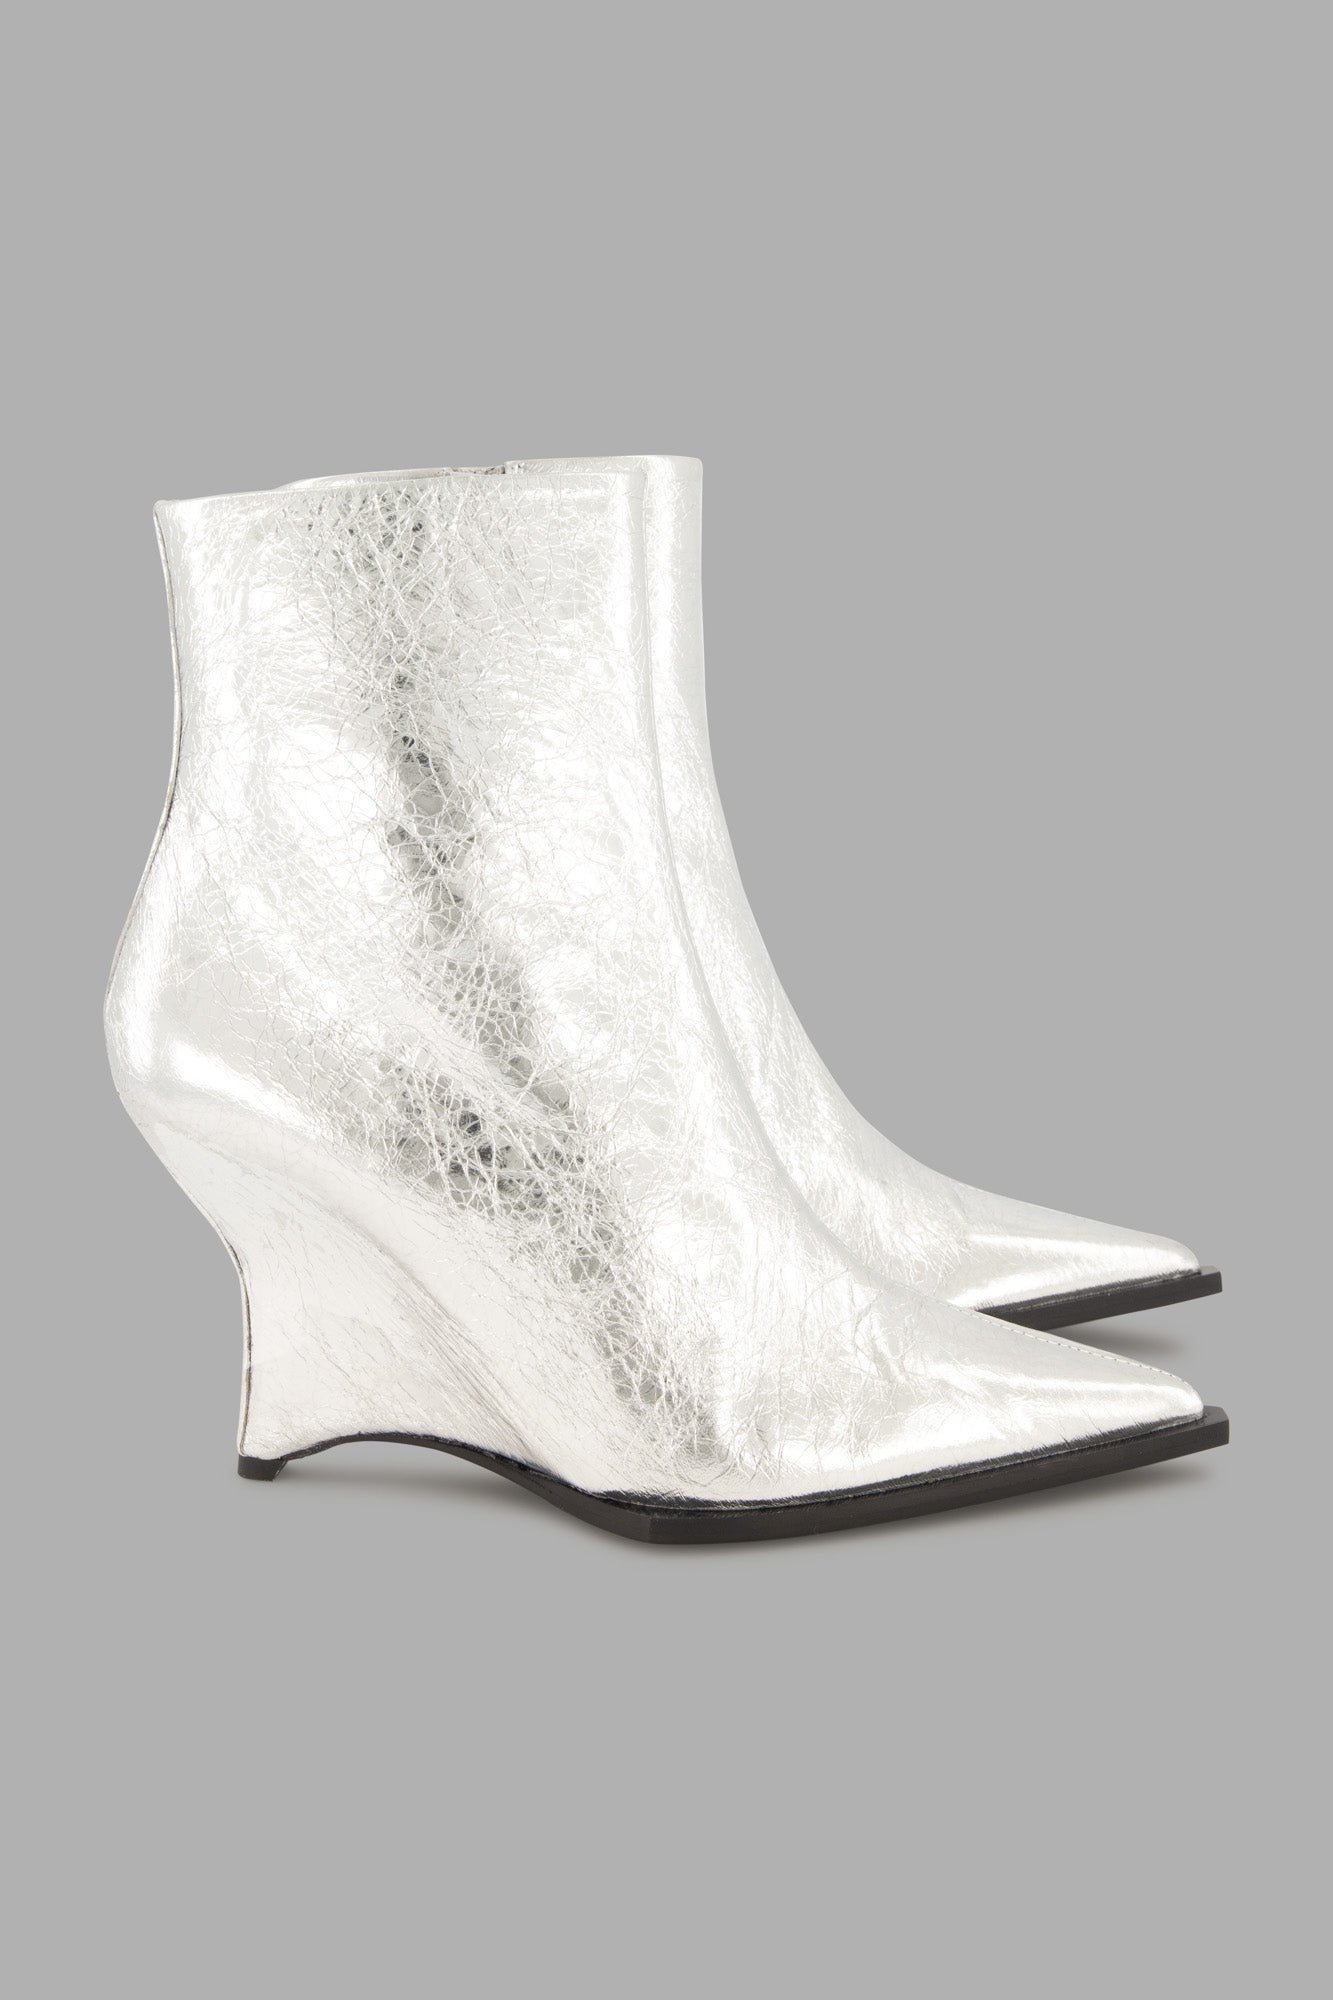 Silver Boots